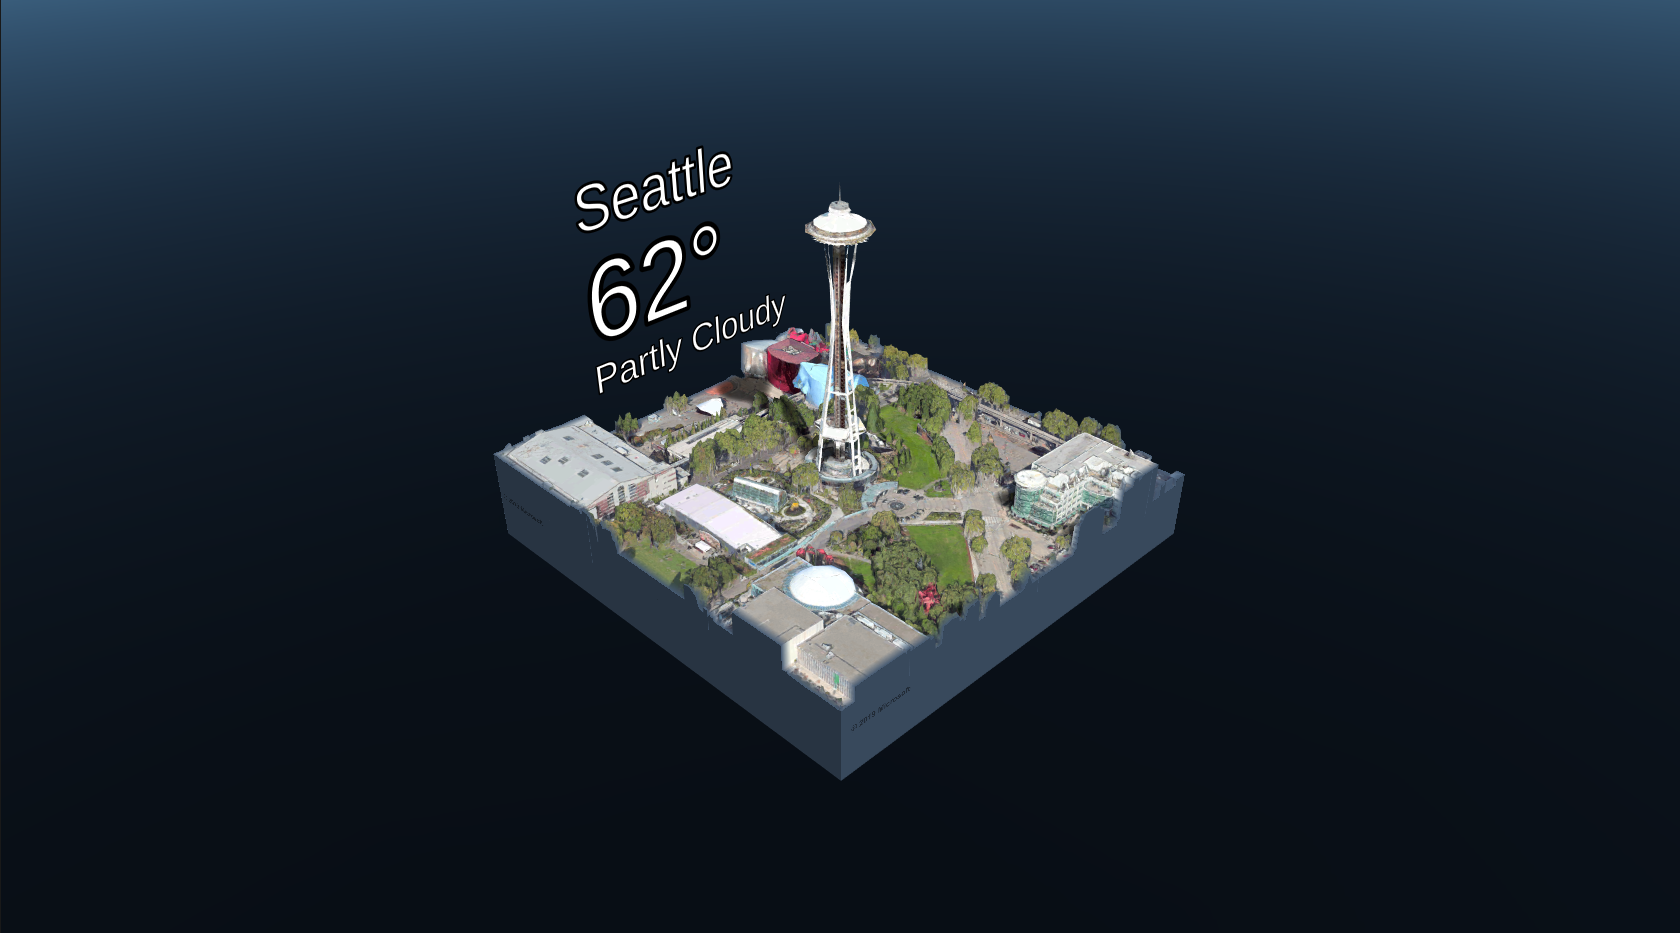 3D map of the Seattle Space Needle